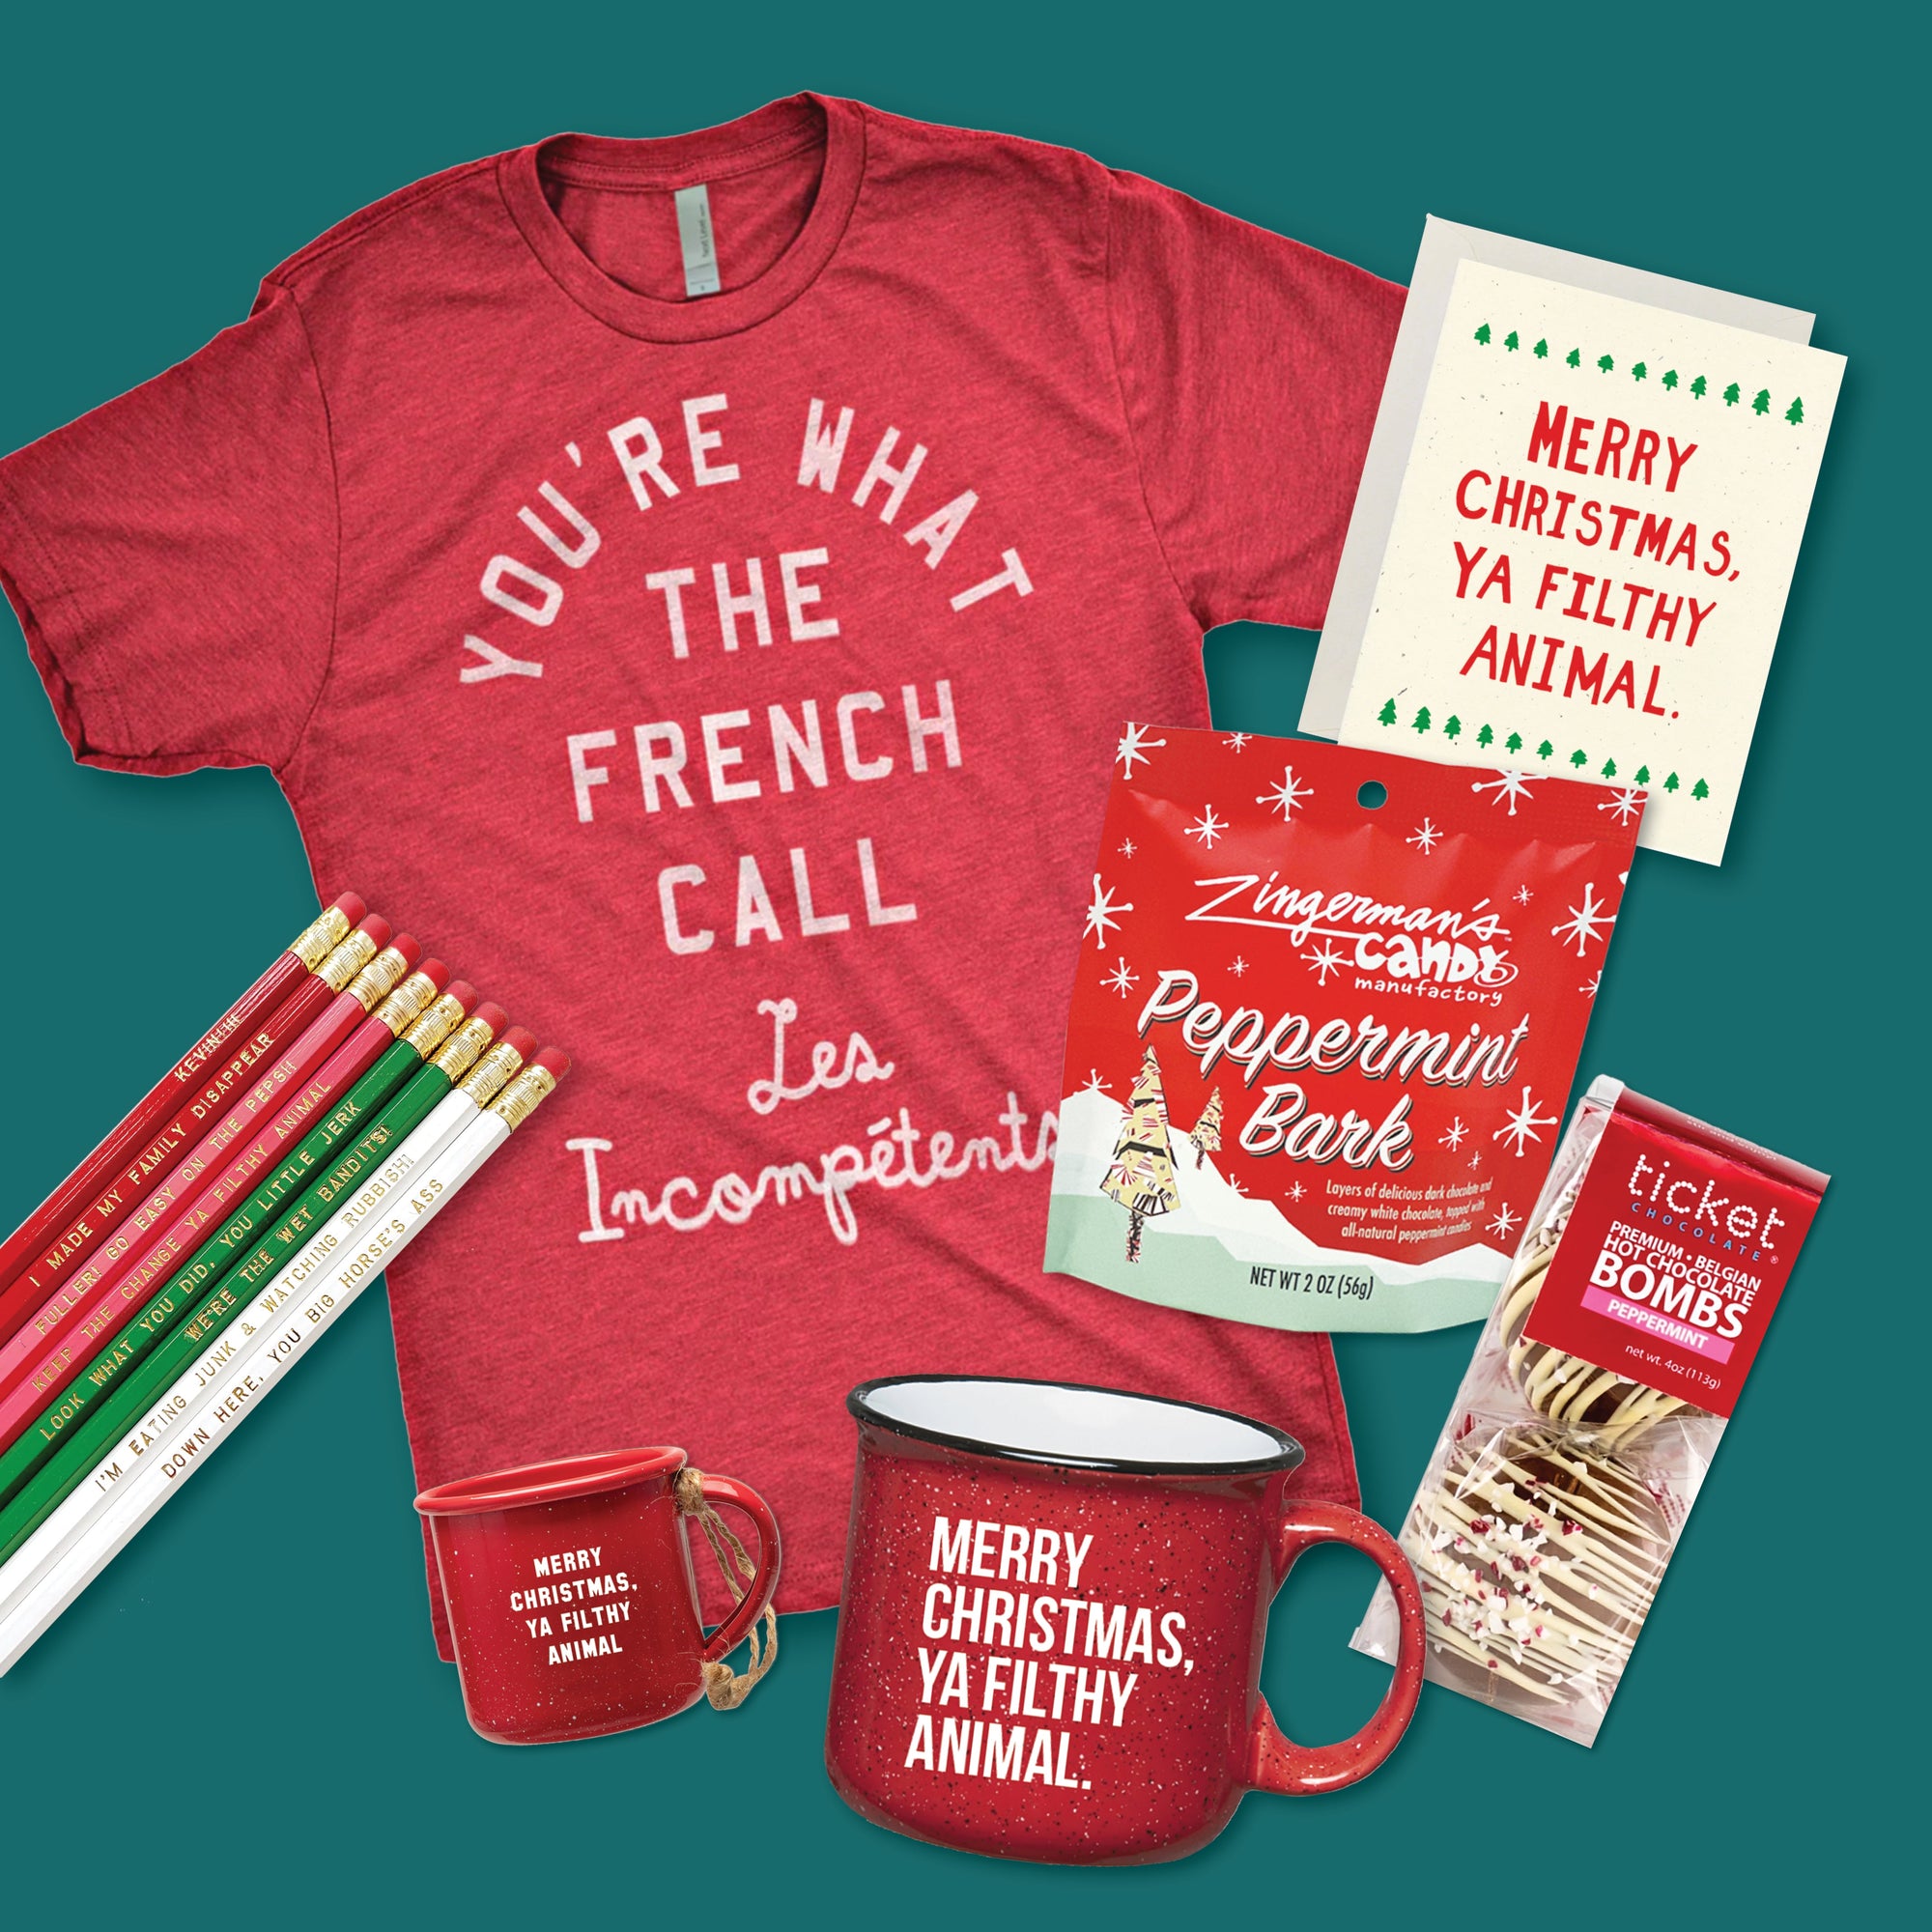 Merry Christmas You Filthy Animal Home Alone Themed Gift Box